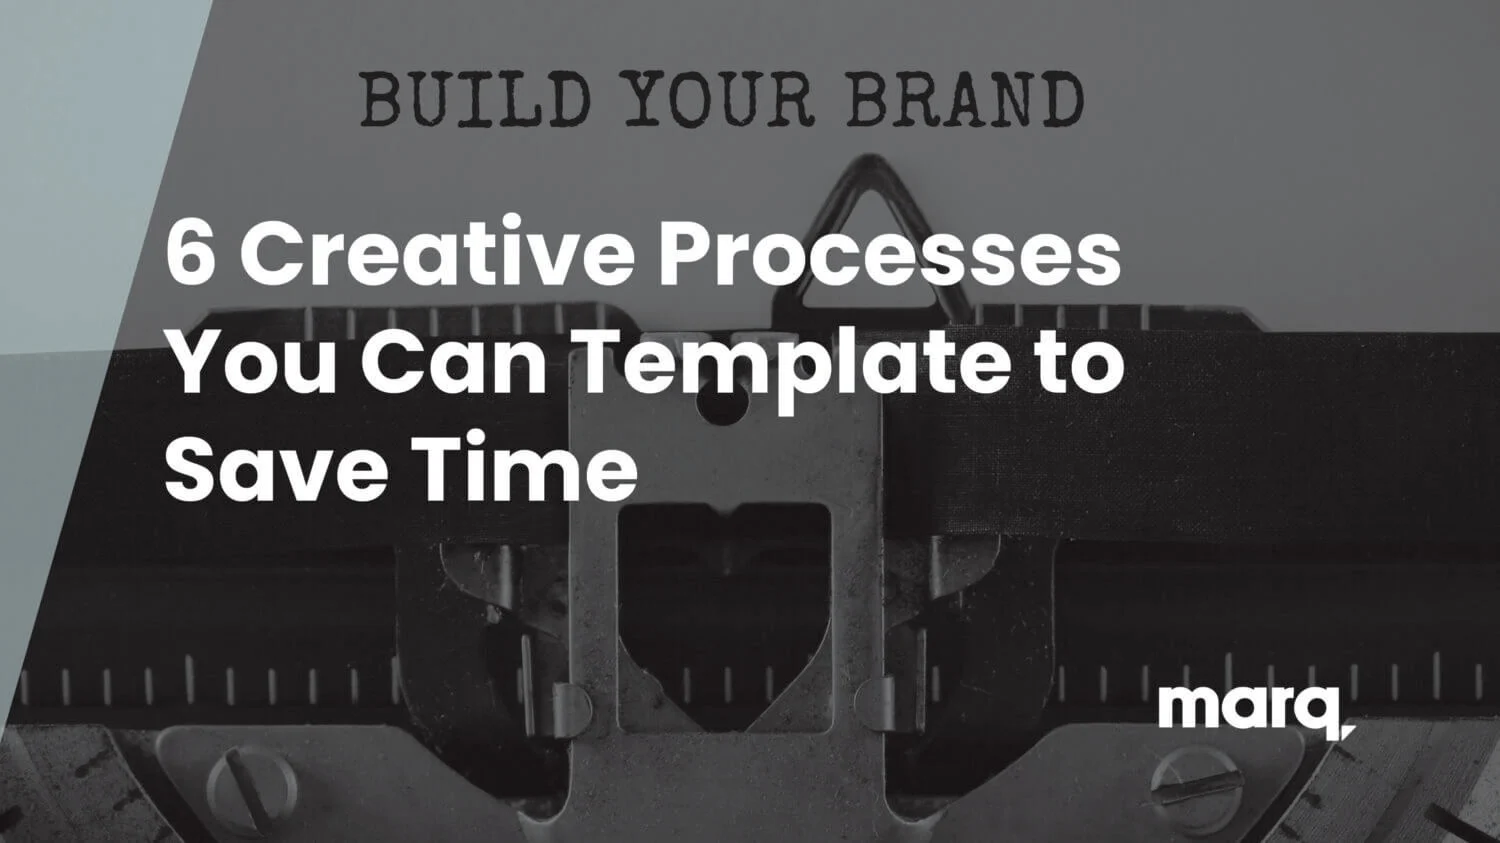 6 Creative Processes You Can Template to Save Time